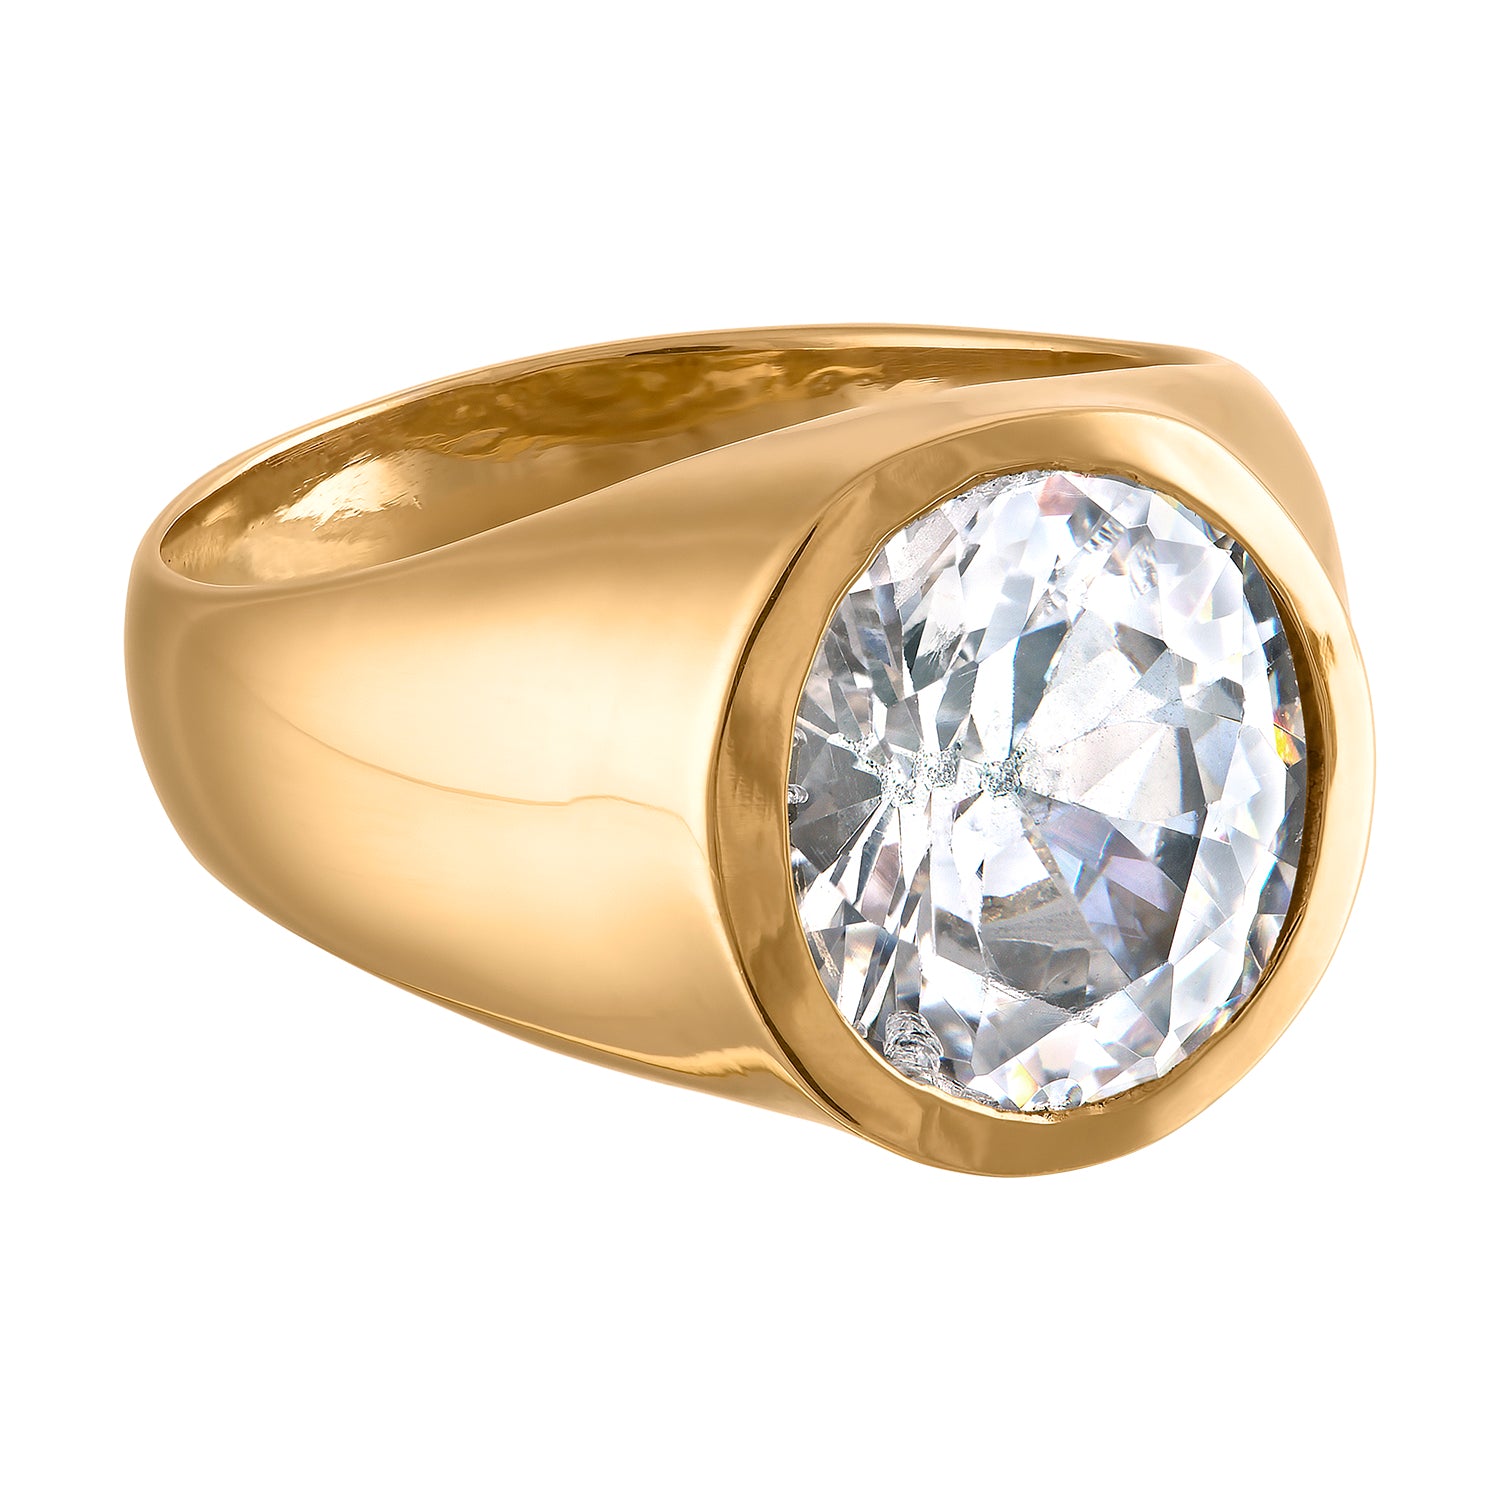 Multi-faceted Signet Ring w/ White Sapphire